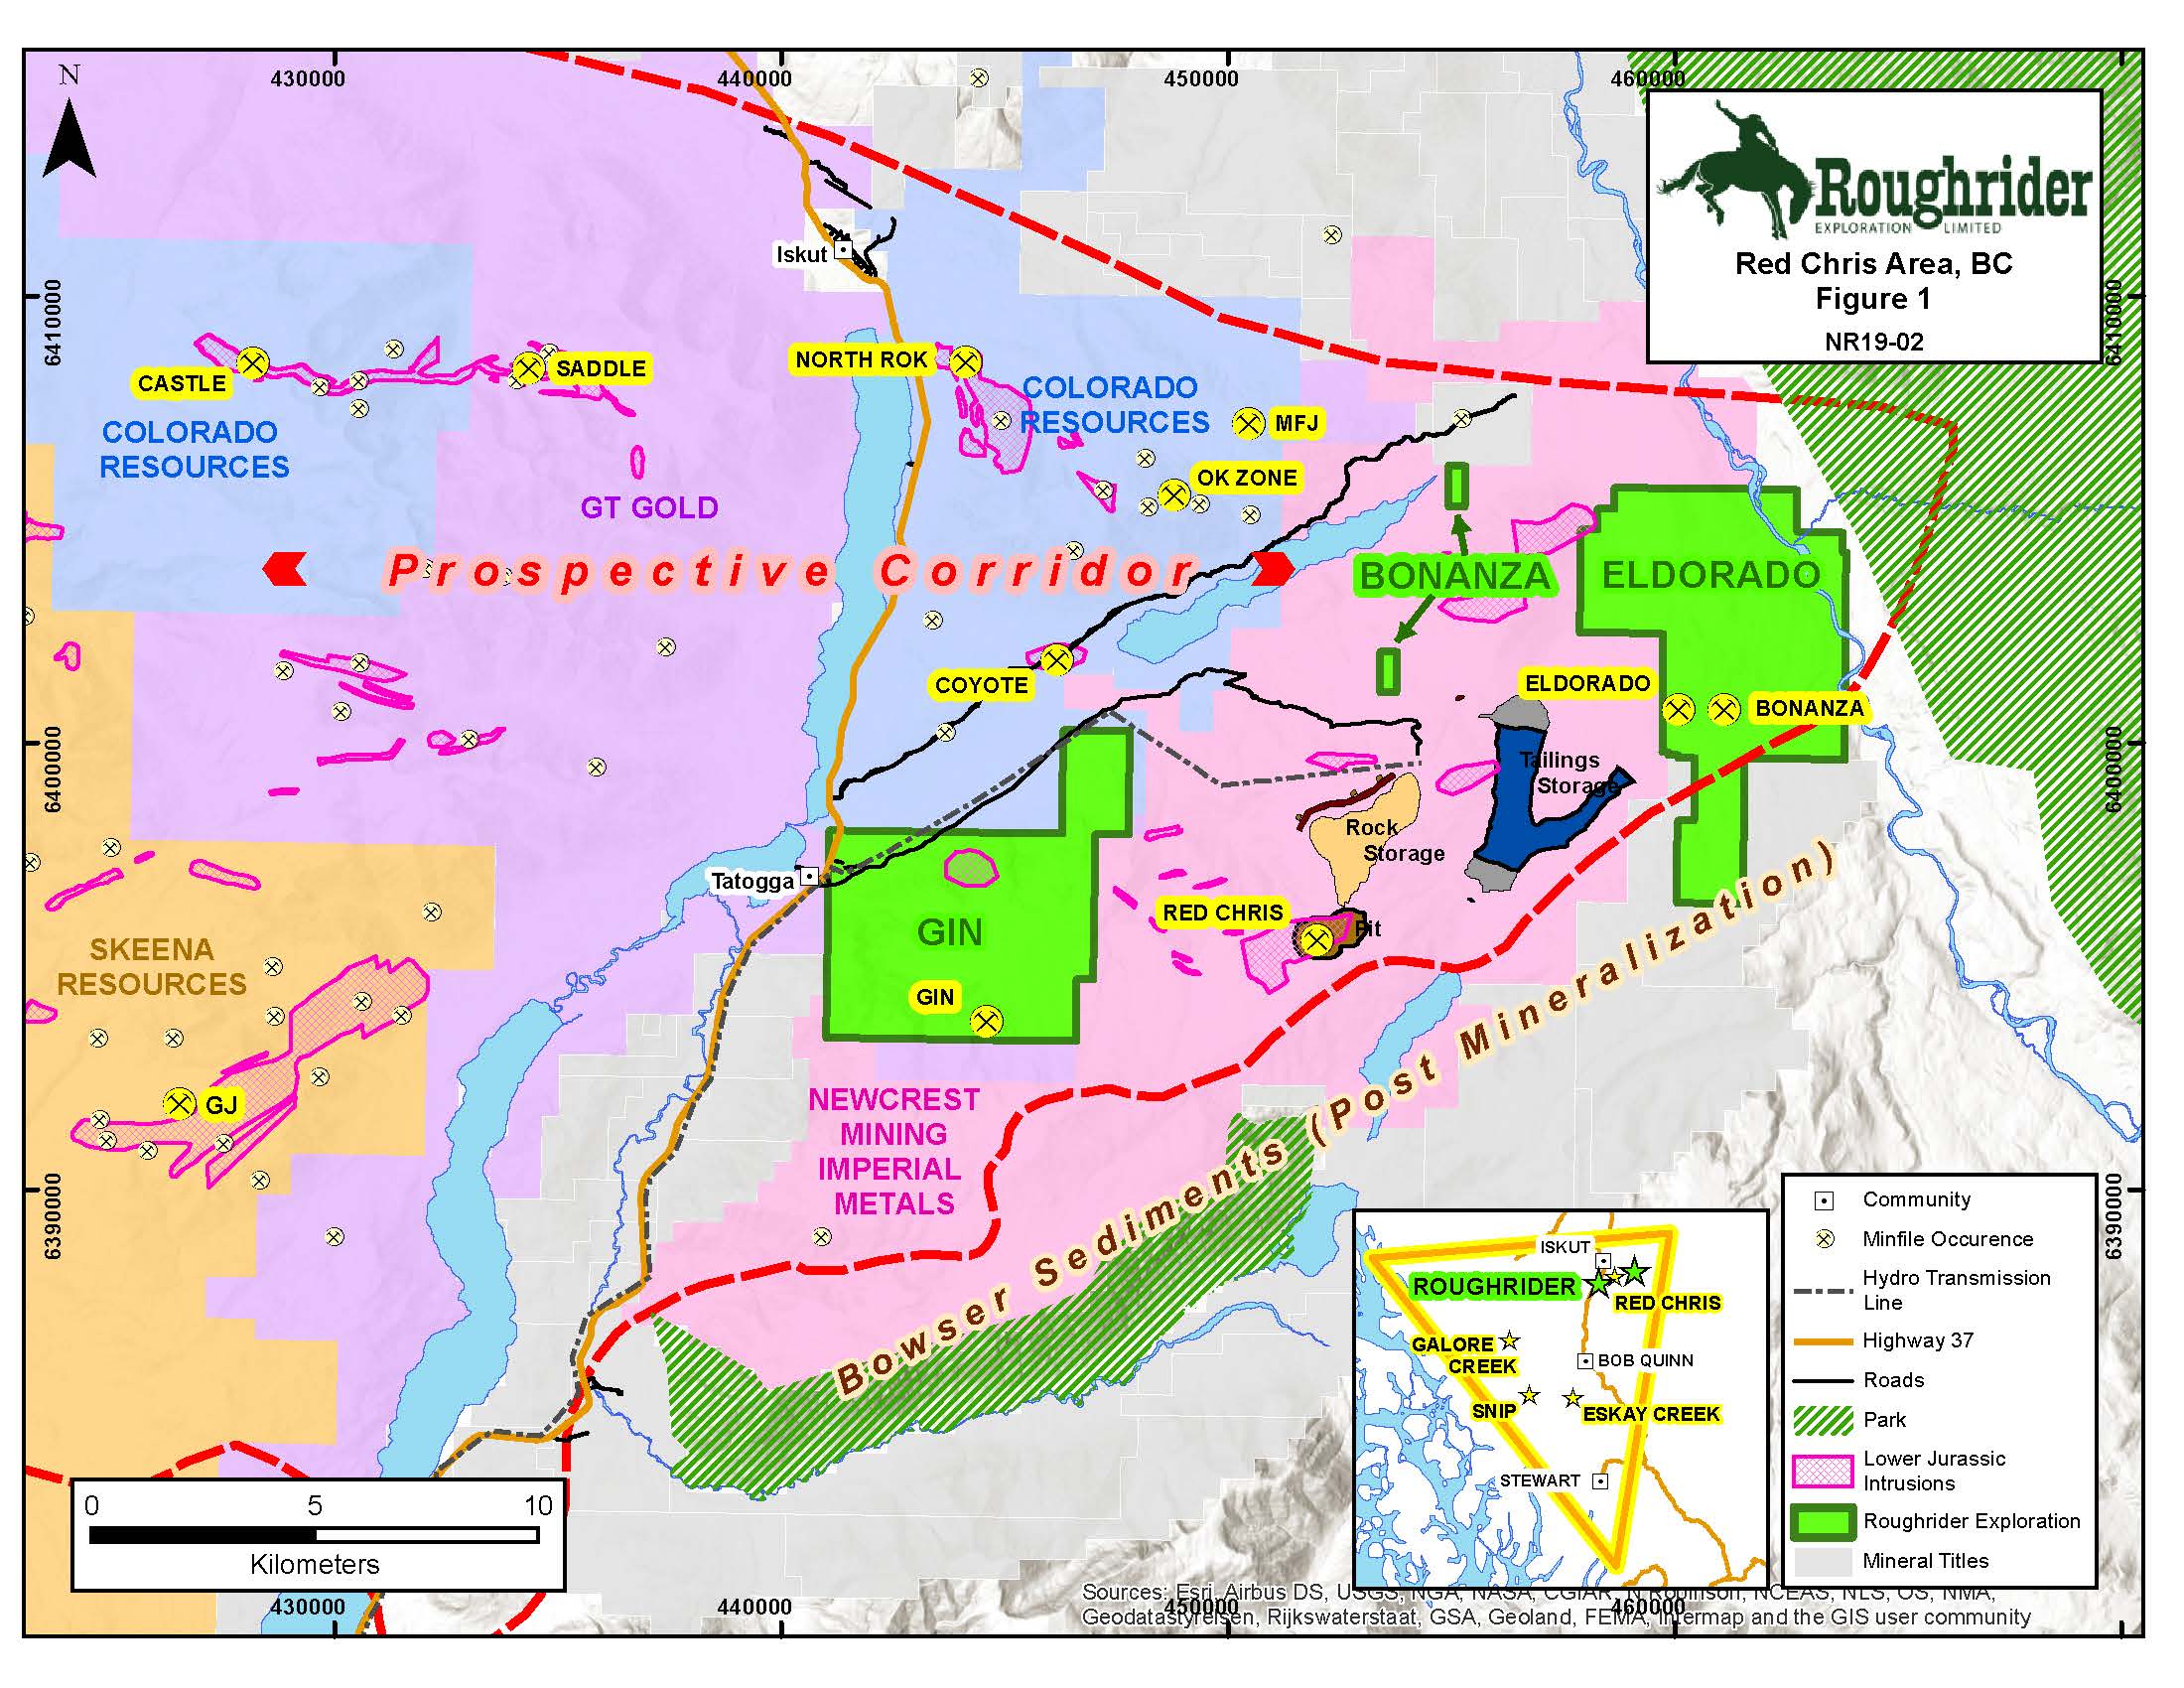 Roughrider Exploration Limited, Friday, November 8, 2019, Press release picture